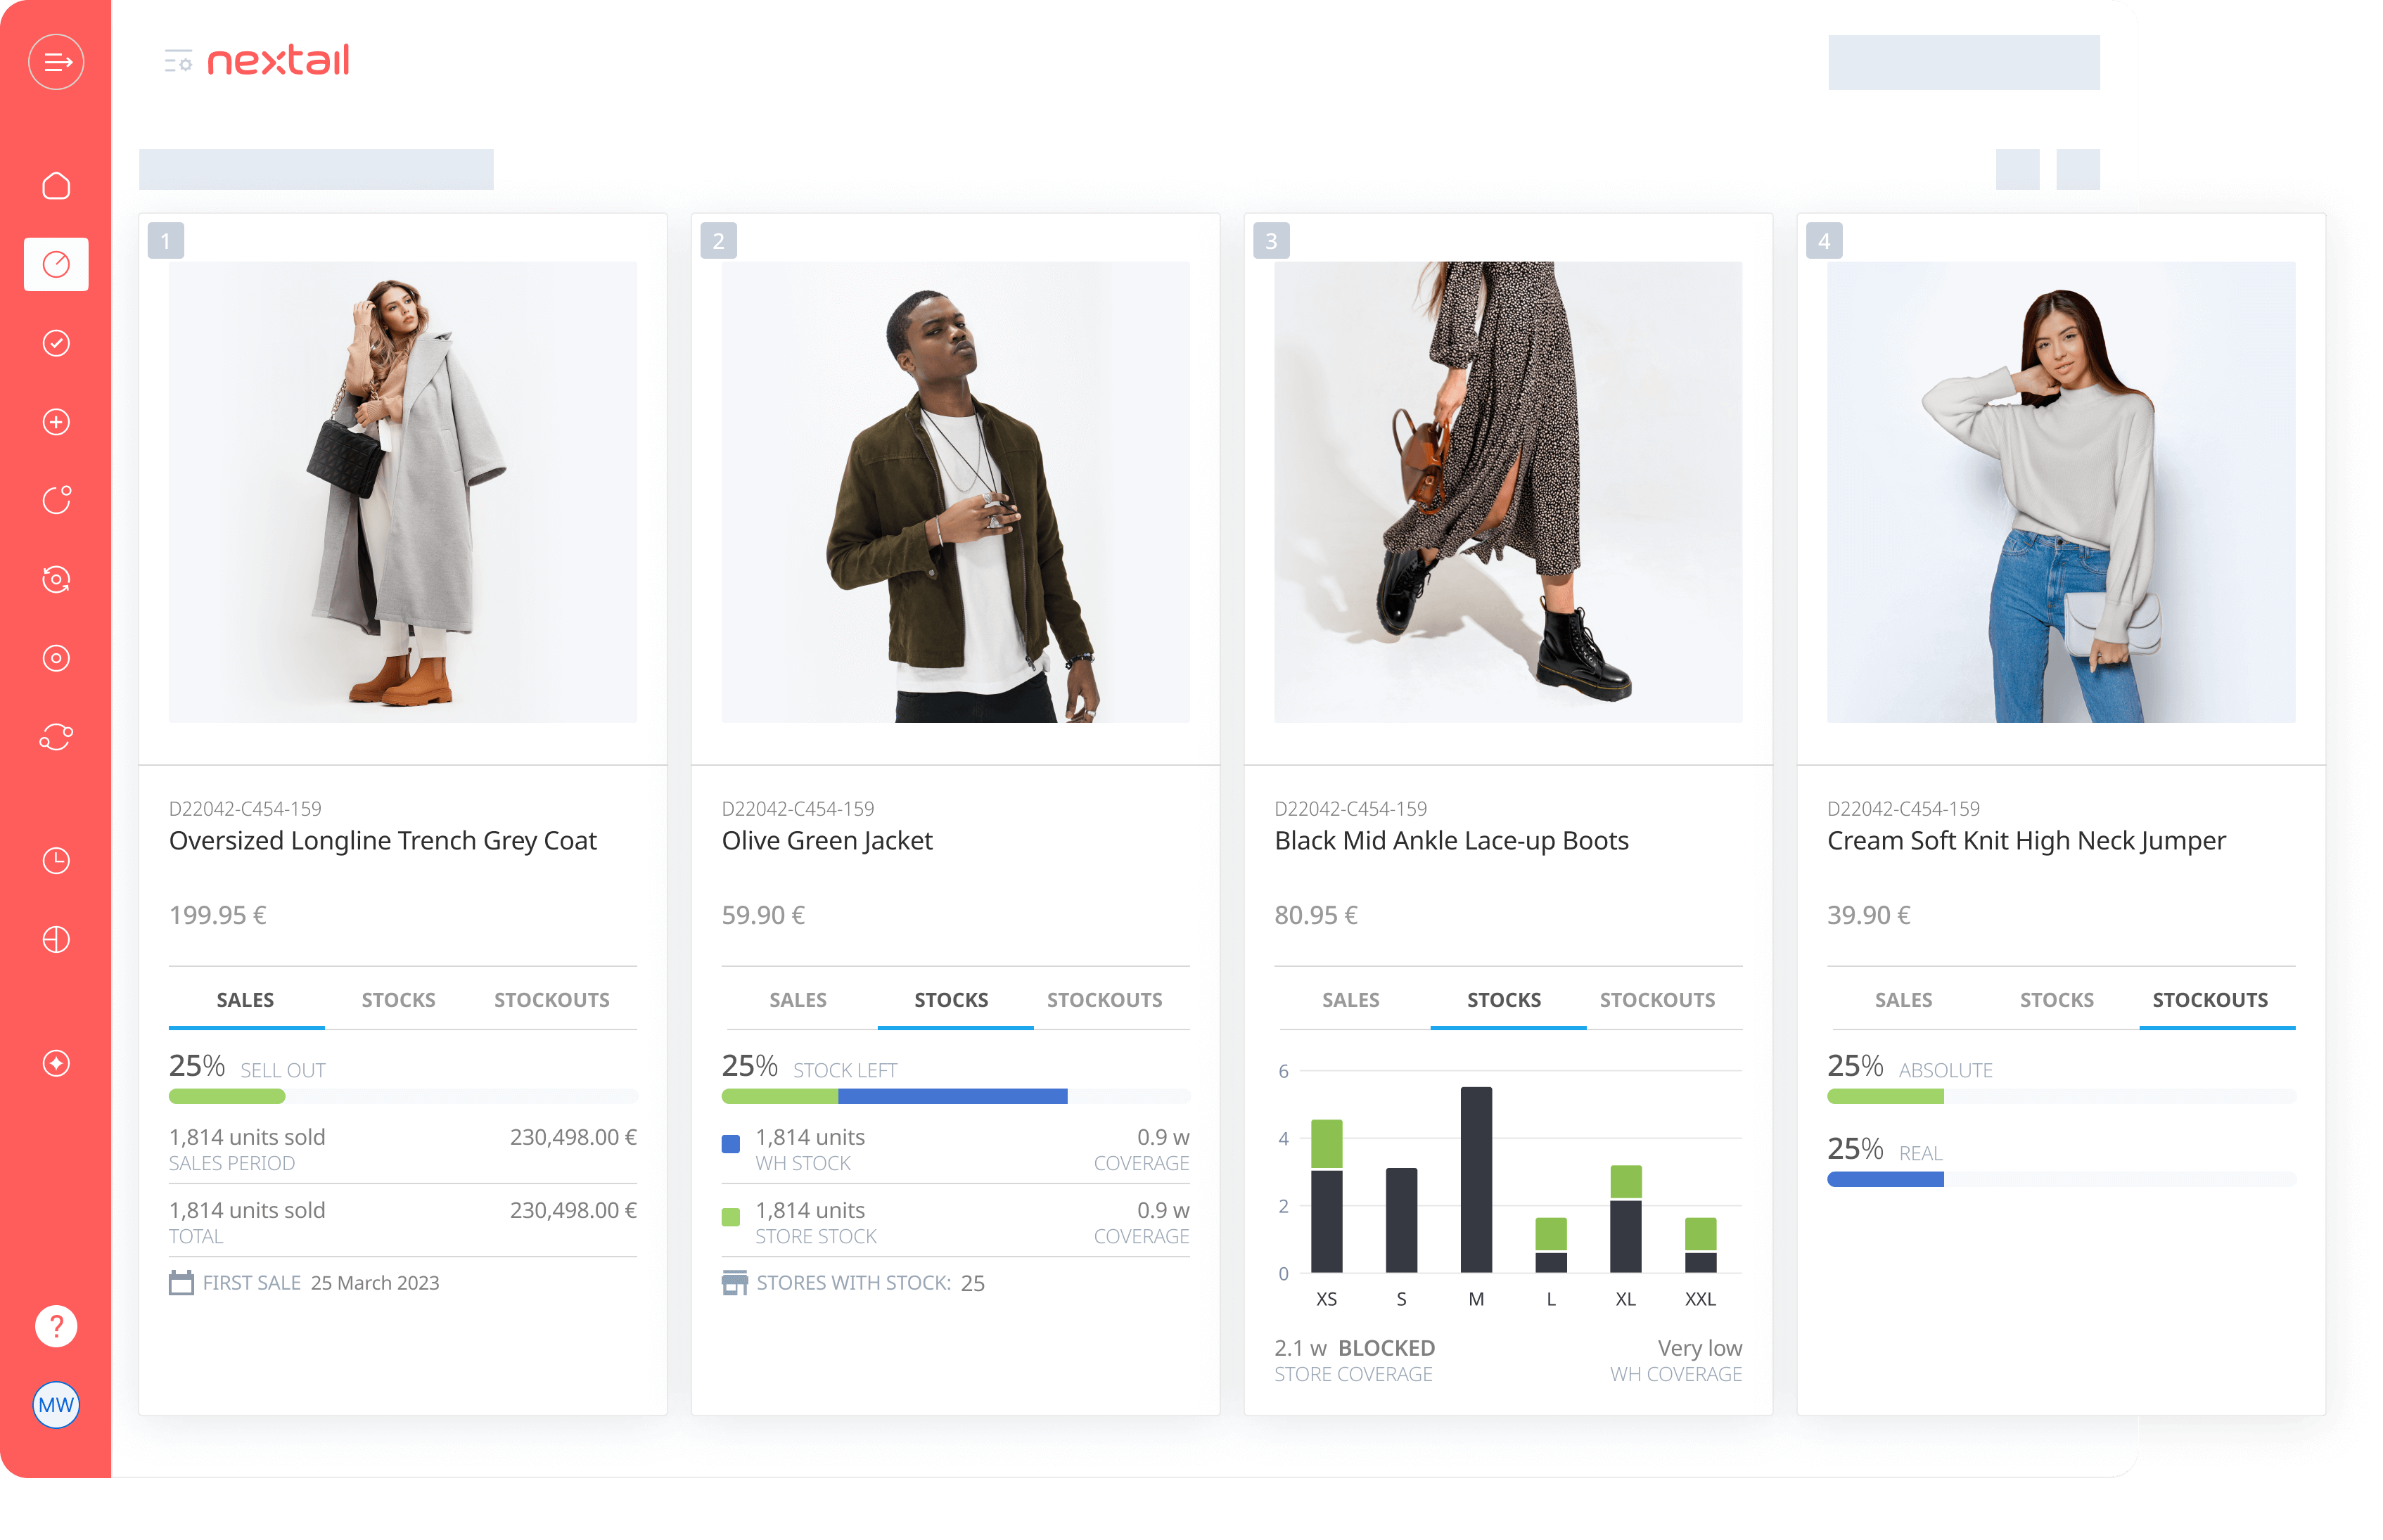 A Nextail Inventory analytics and sales KPIs dashboard displaying top products and stores by sales, coverage, lost sales, stockouts.